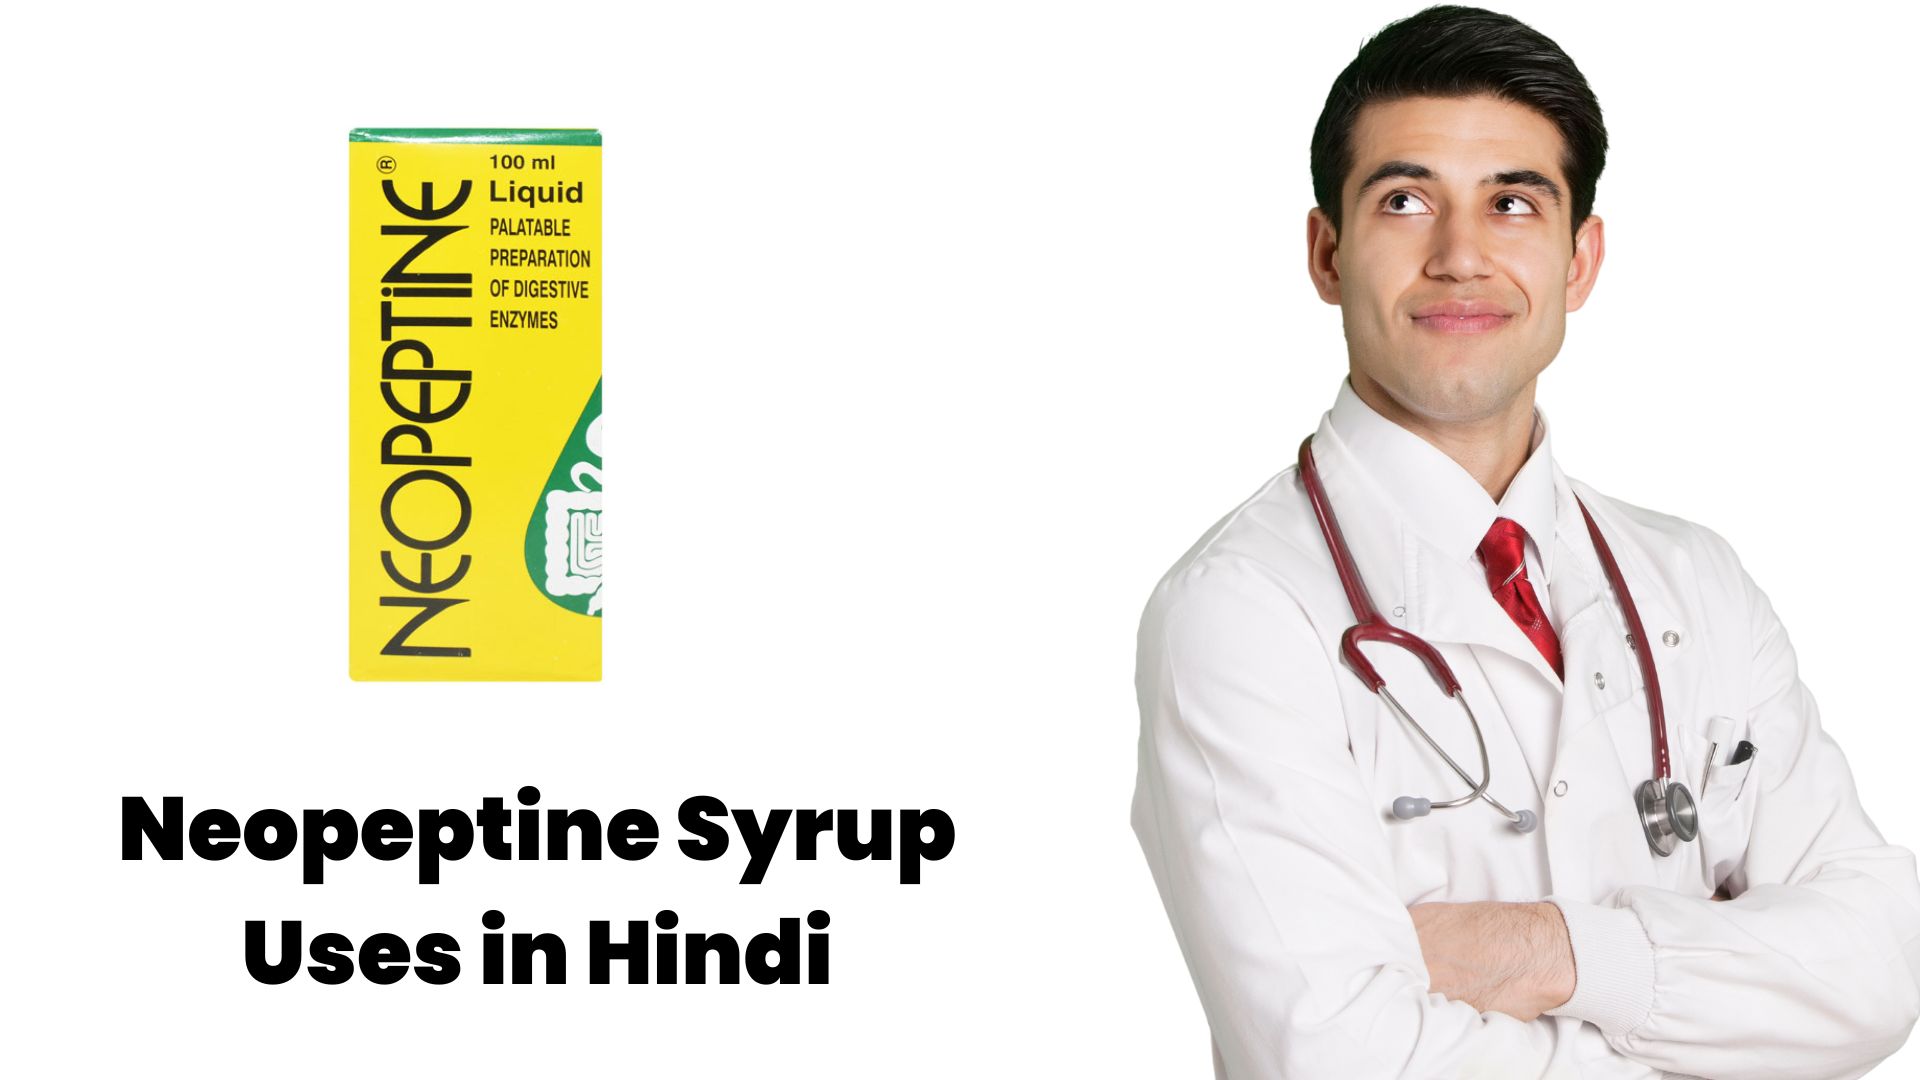 Neopeptine Syrup Uses in Hindi